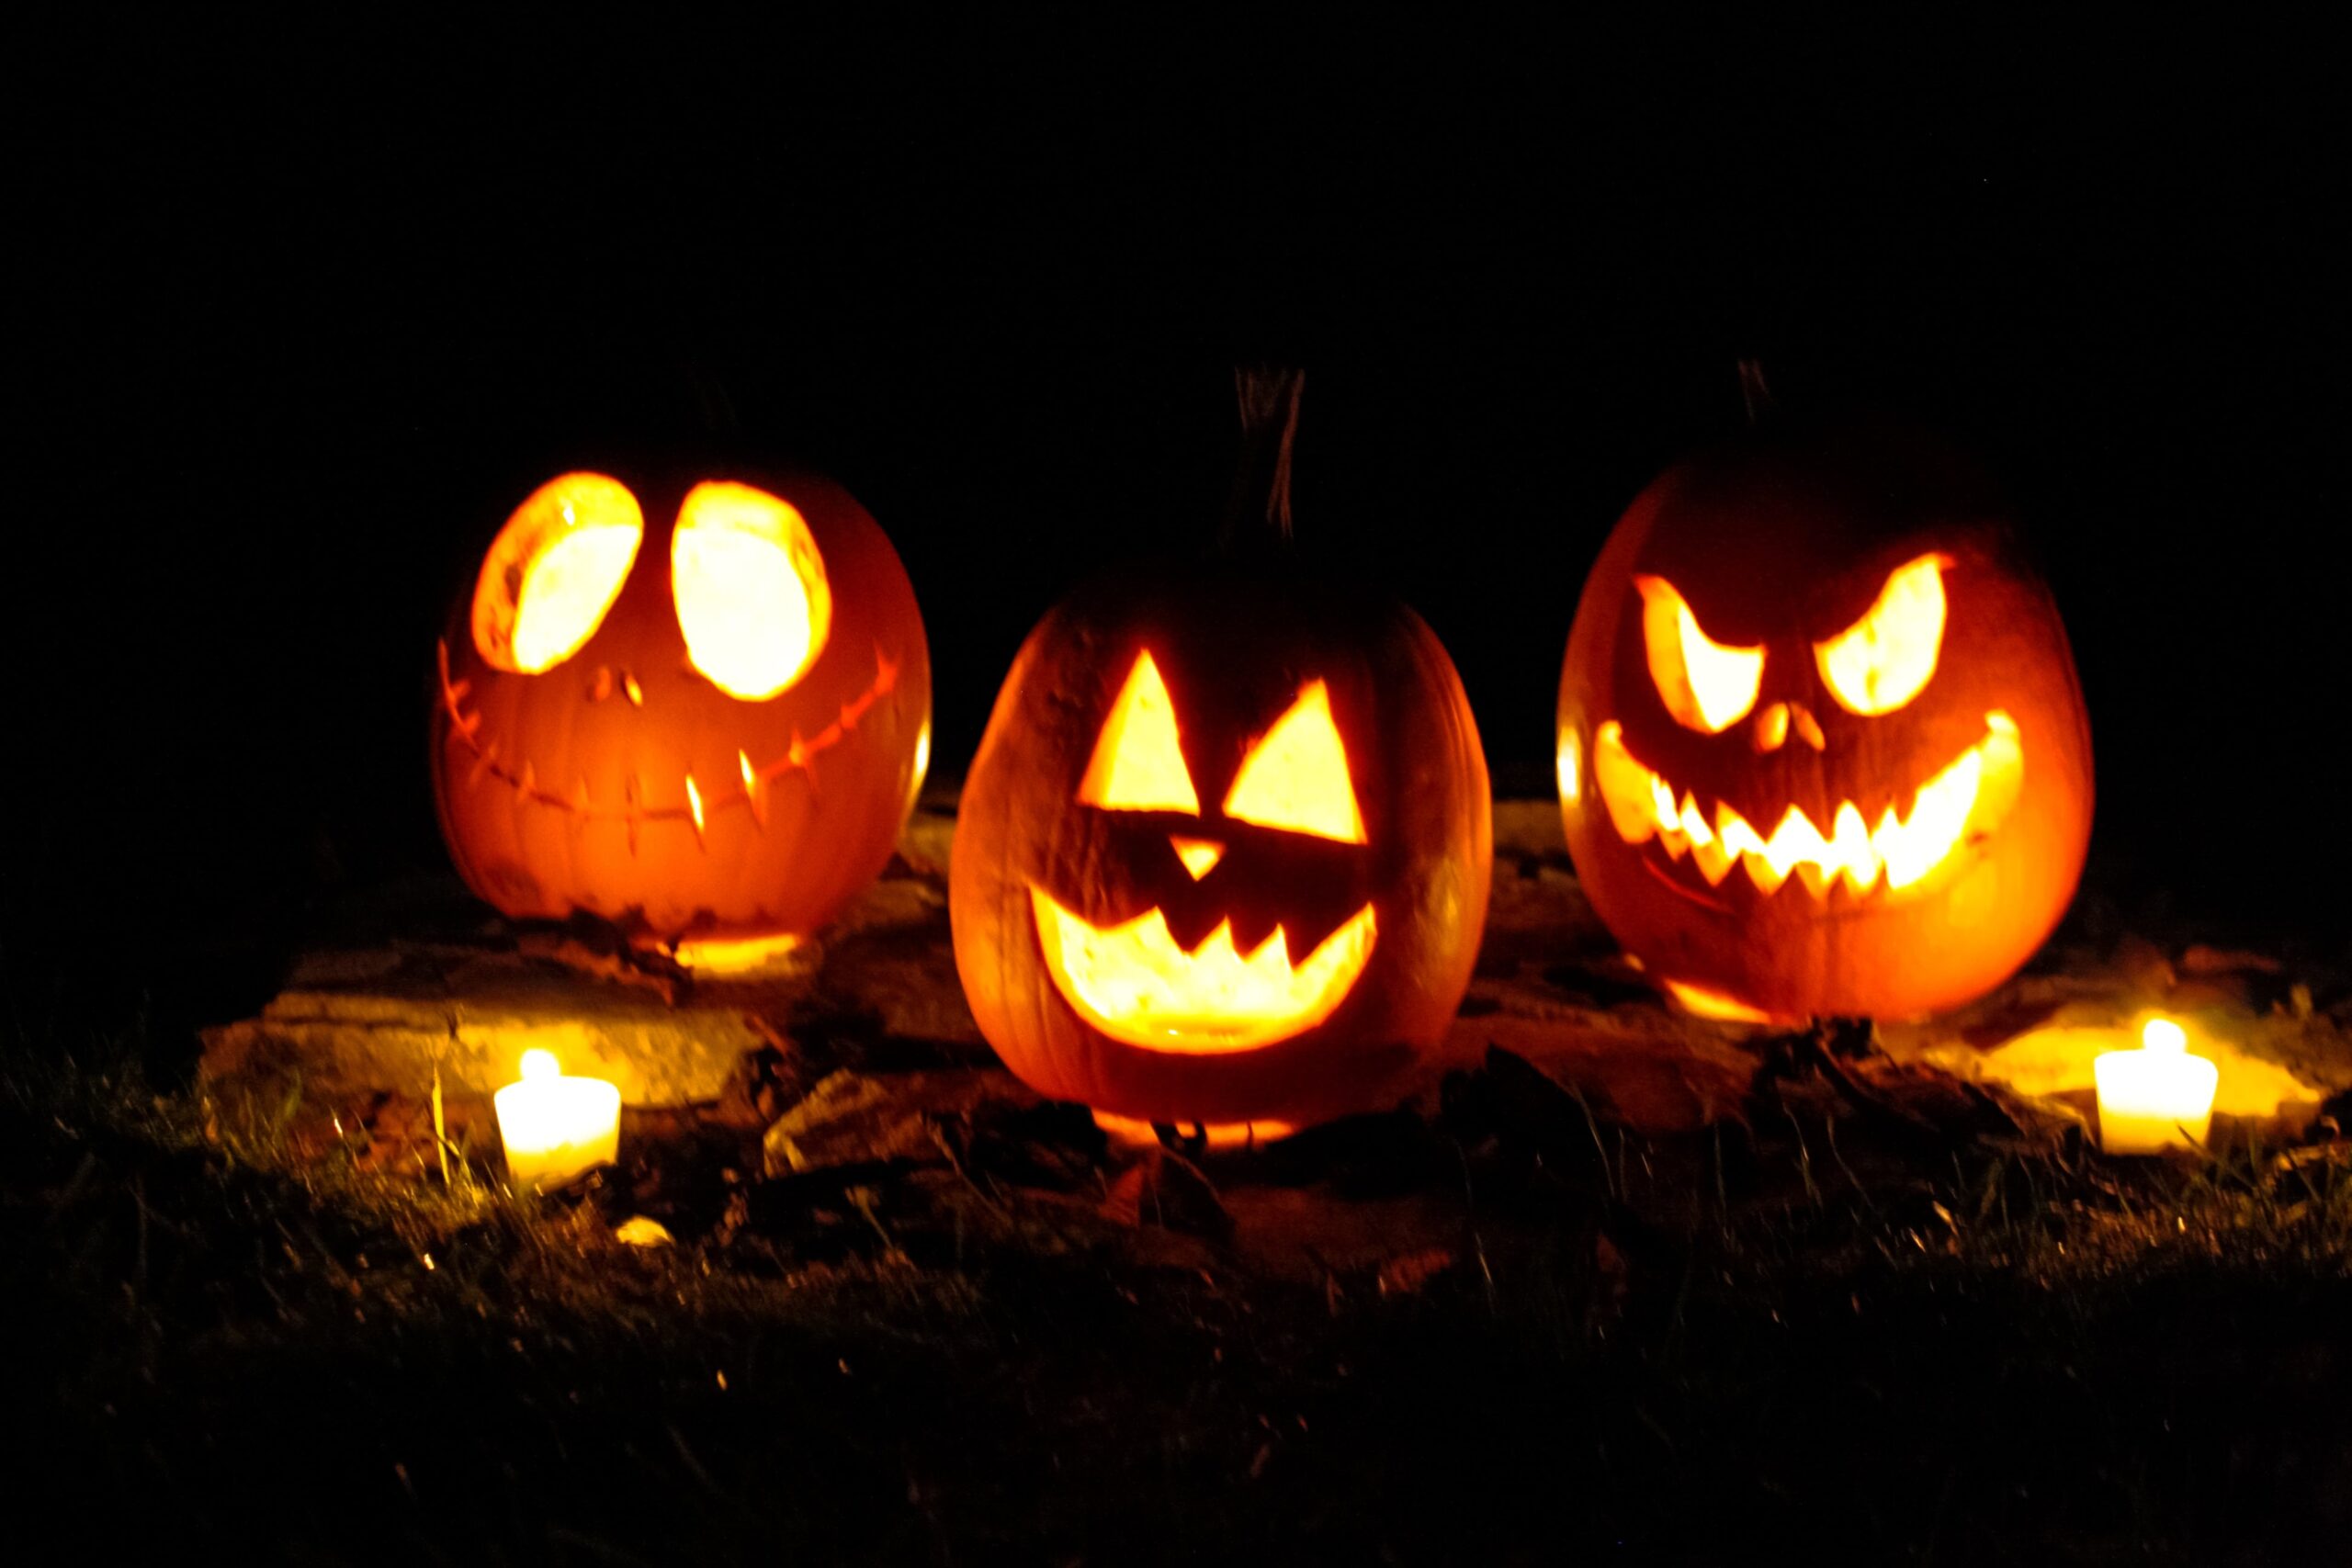 pumpkins with scary faces in the dark lite up - decorations for halloween party catering